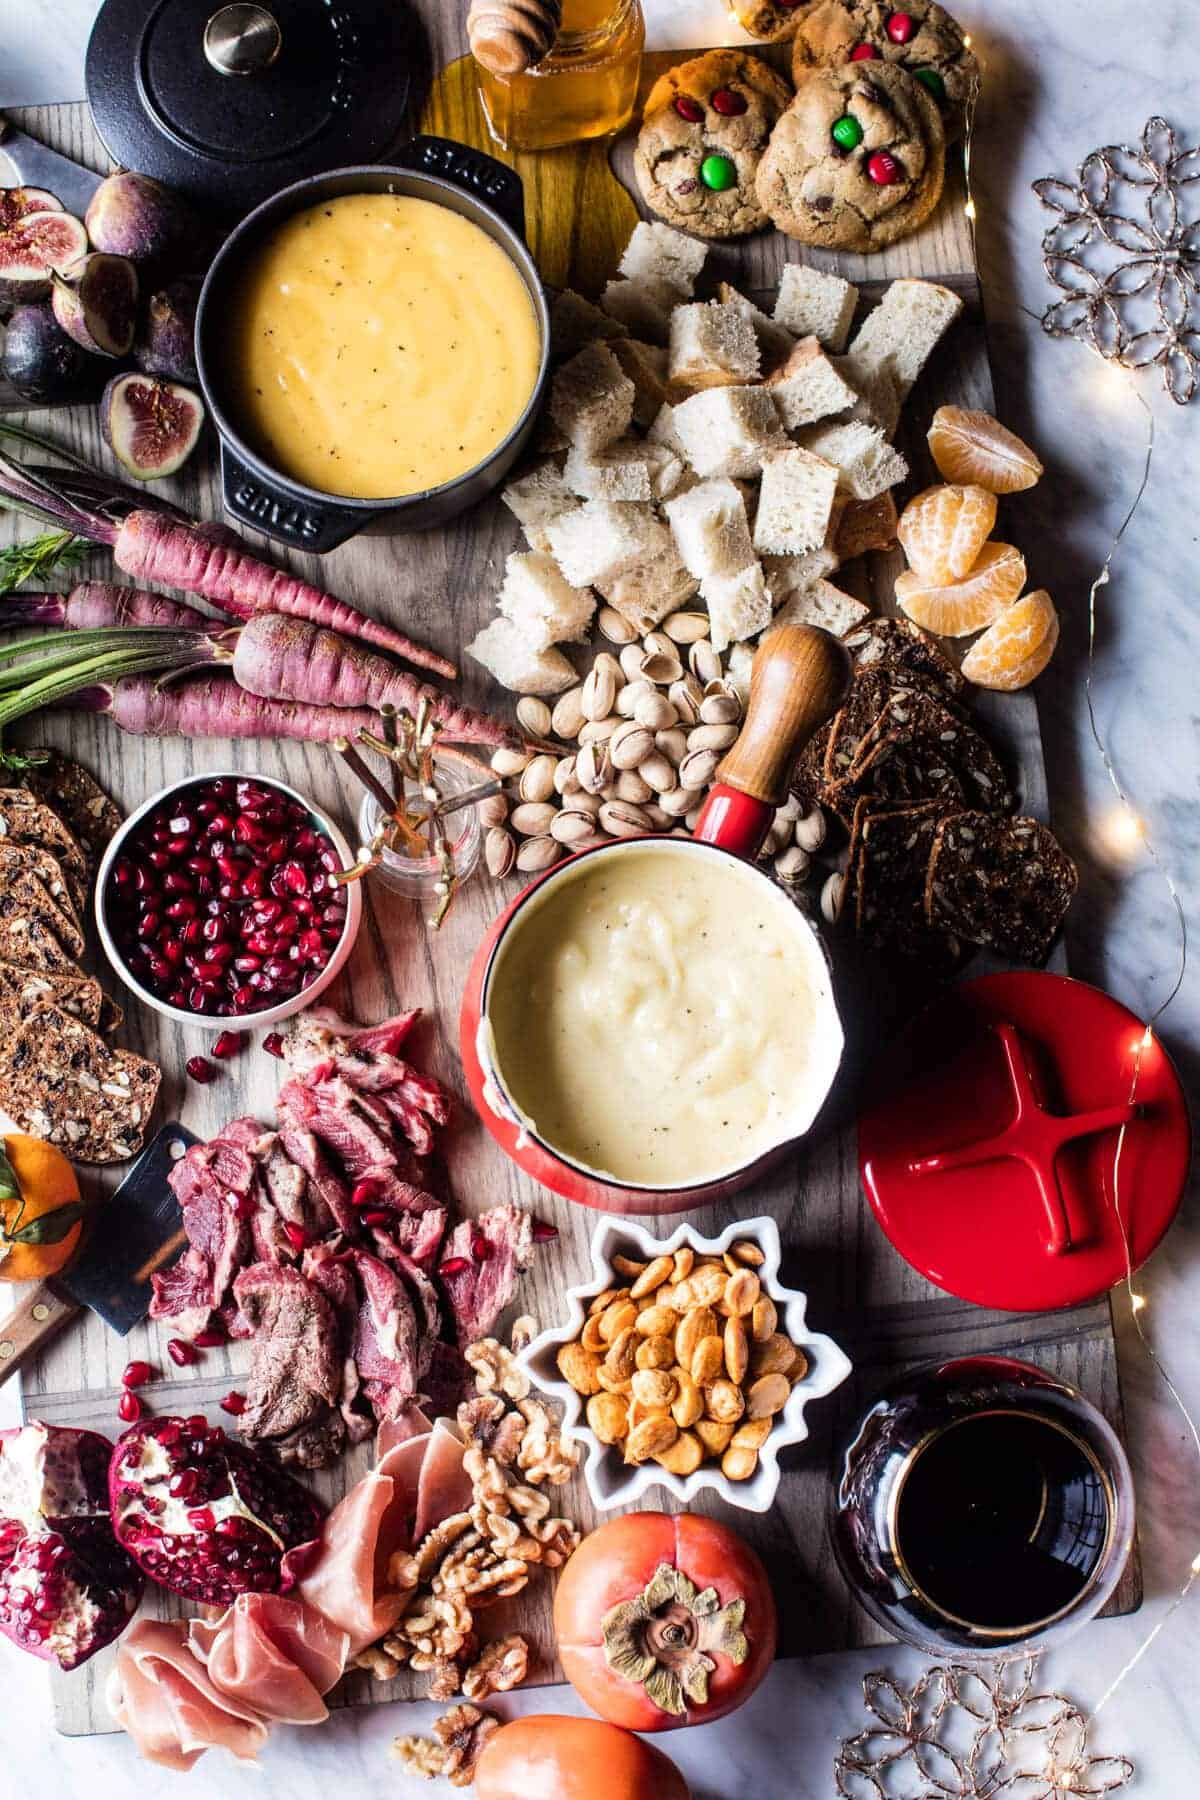 Unleash Your Inner Foodie: 41 Insta-Worthy Charcuterie Board Ideas That Will Make Your Guests Drool 24